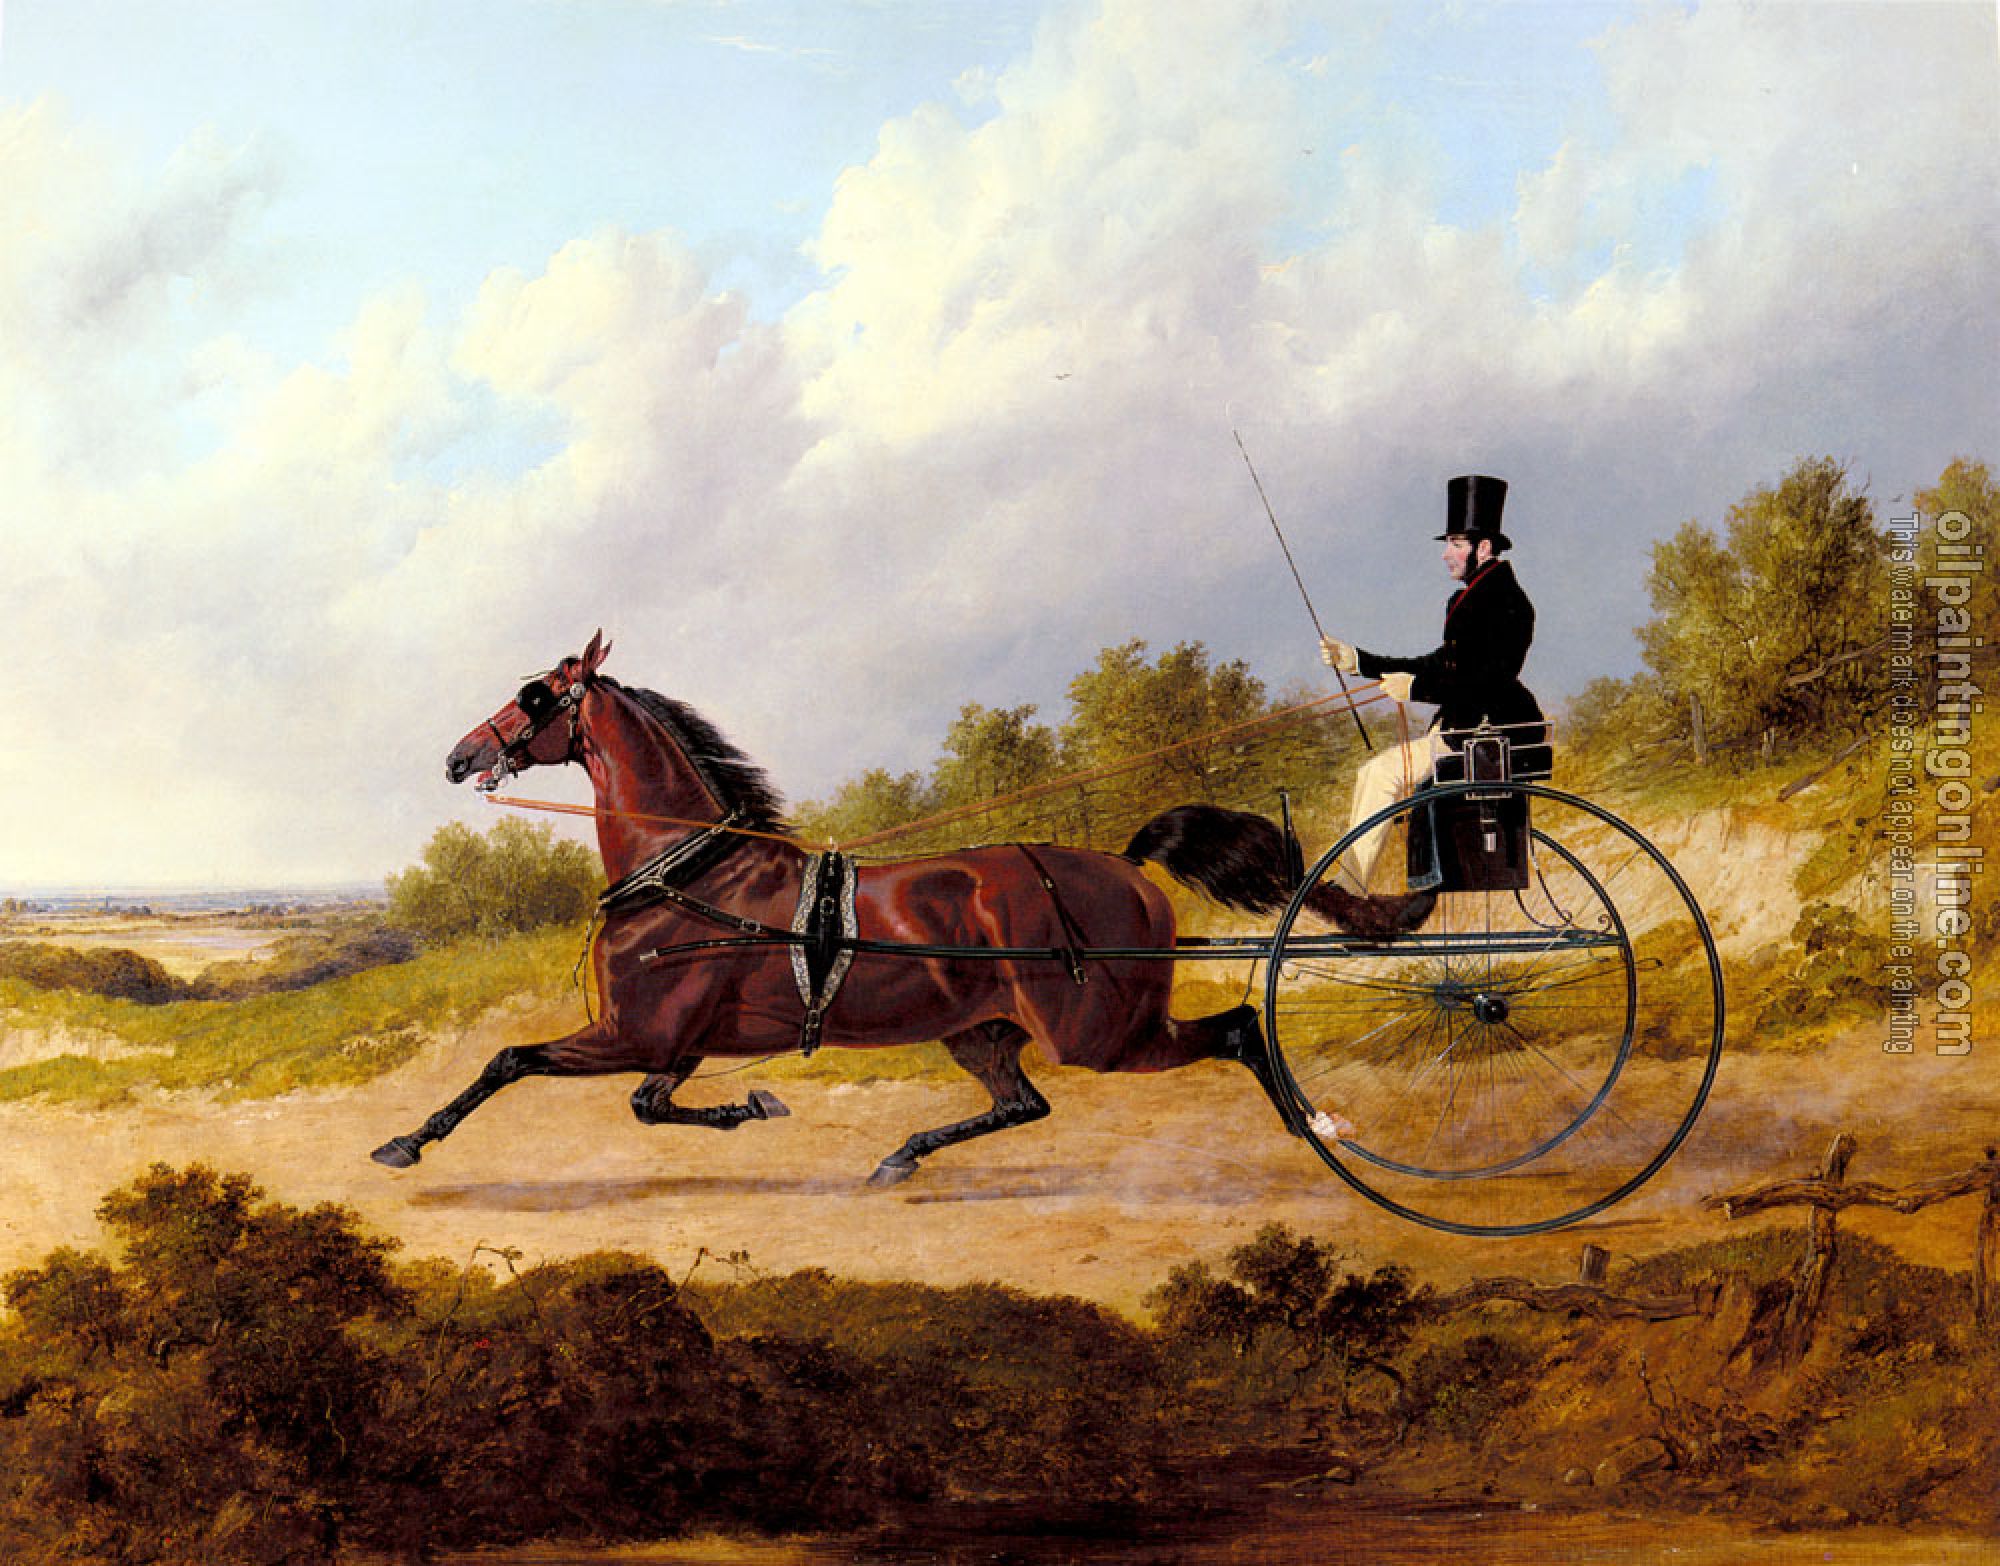 Herring, John Frederick Jr - The Famous Trotter Confidence Drawing A Gig